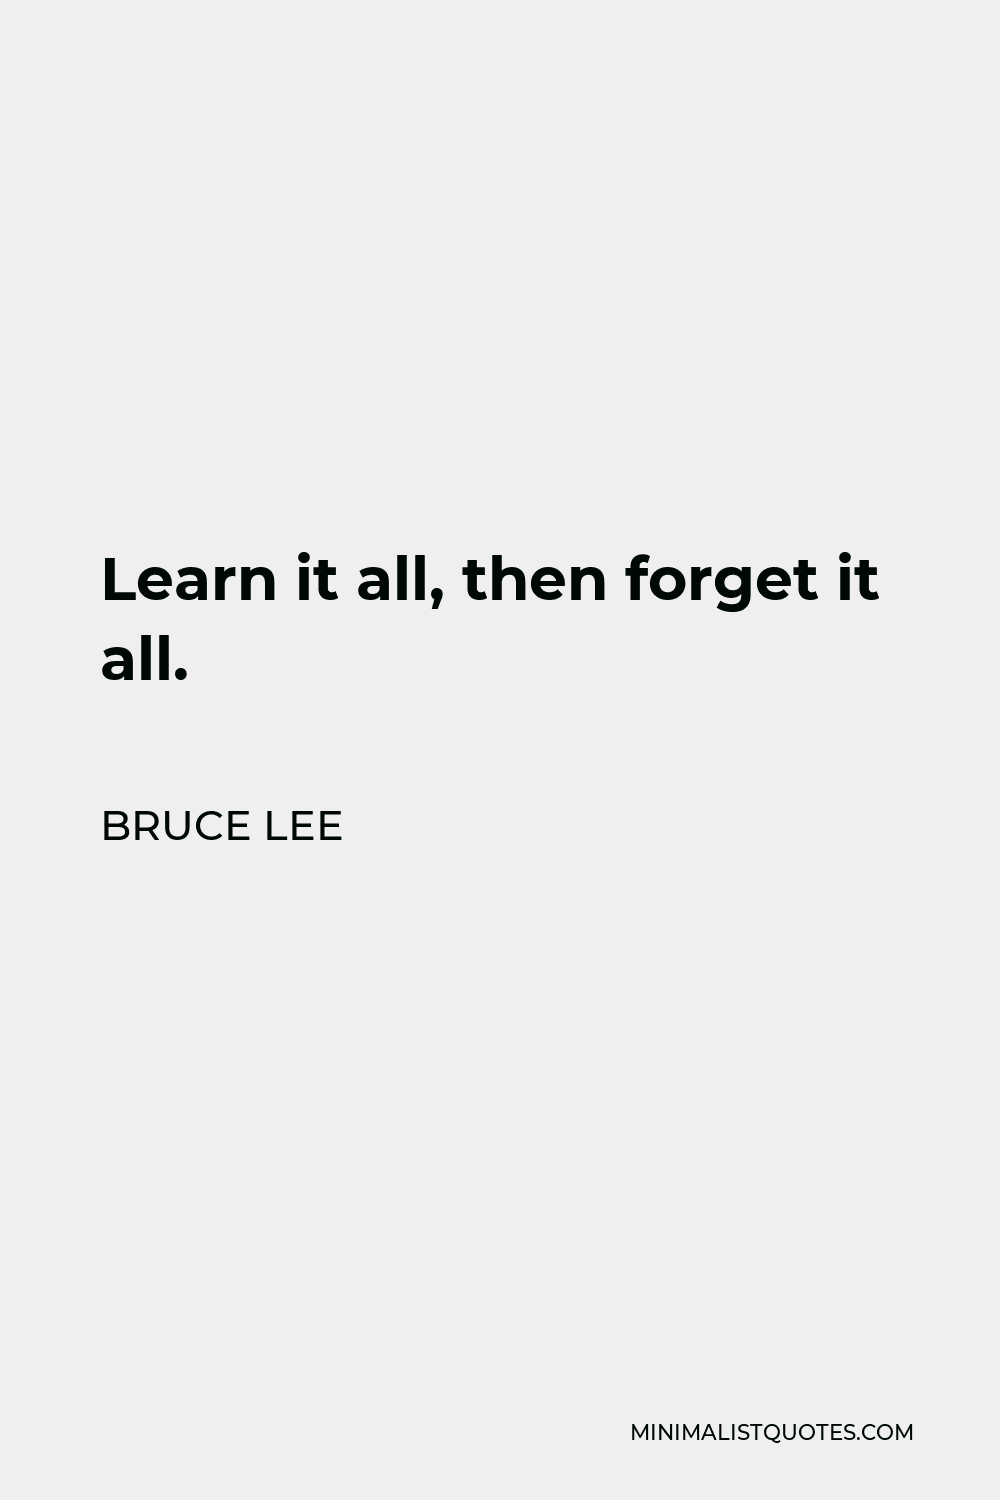 Bruce Lee Quote - Learn it all, then forget it all.